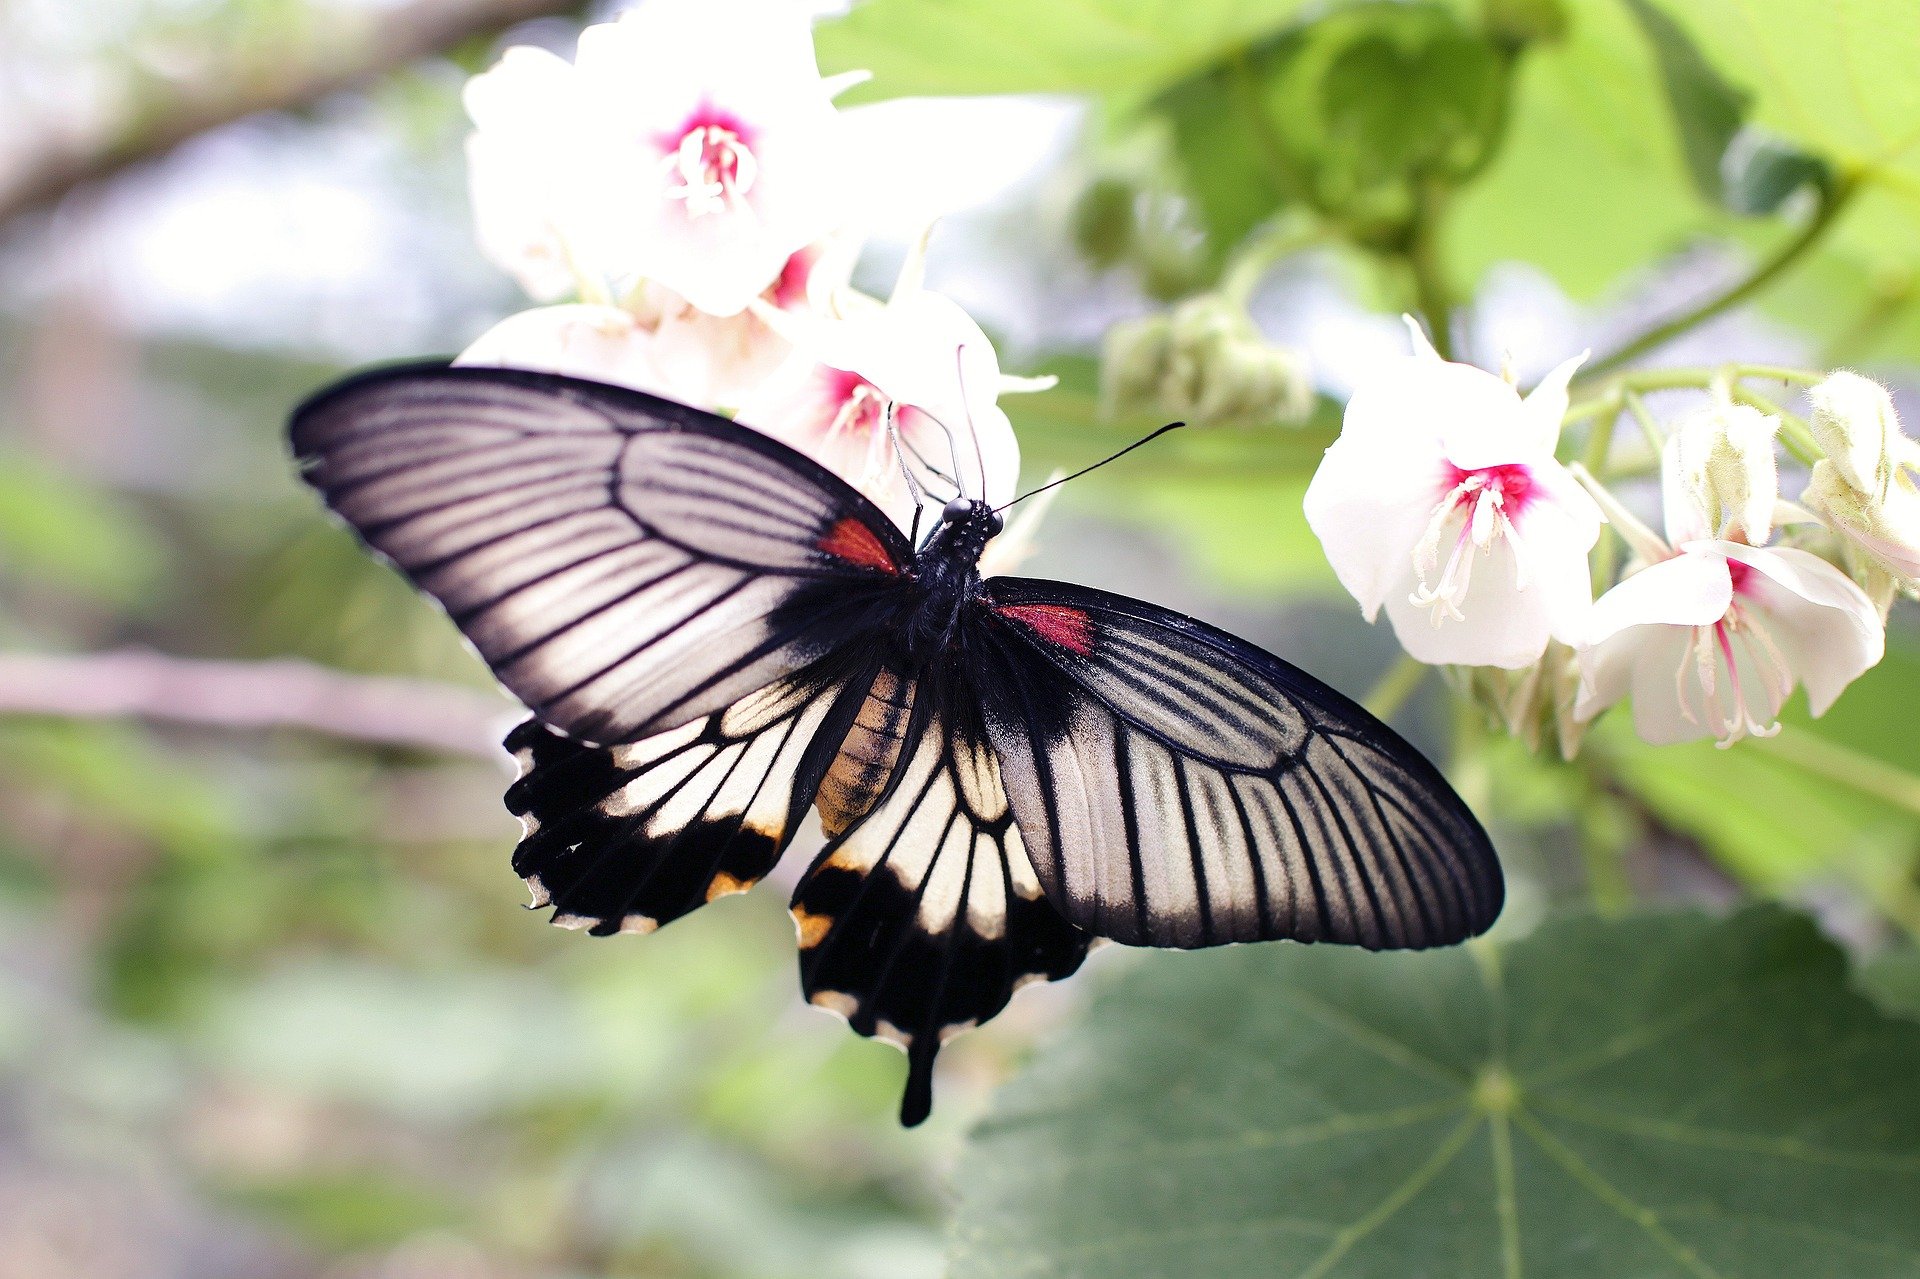 butterfly black white and pink near a small group of white and pink flowers